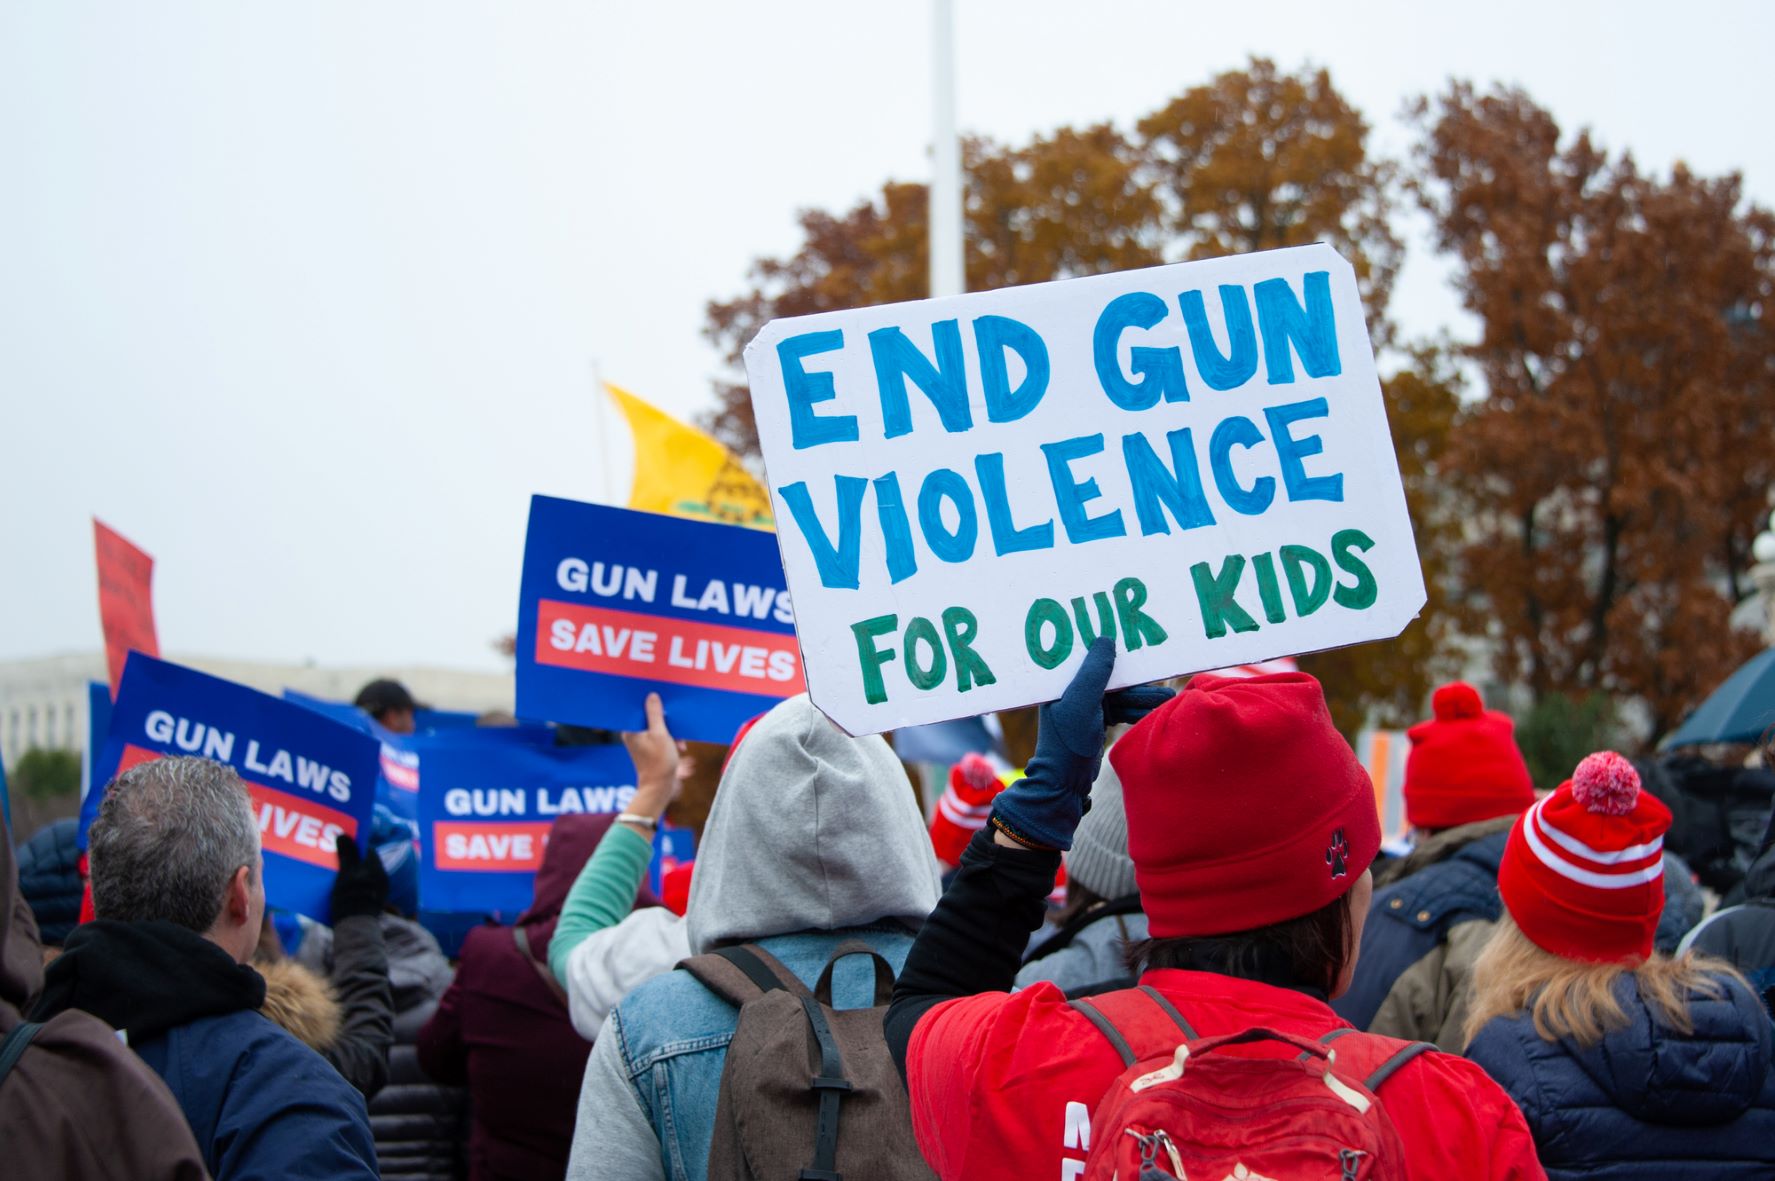 climate-of-fear:-teachers-grapple-with-growing-number-of-school-shootings